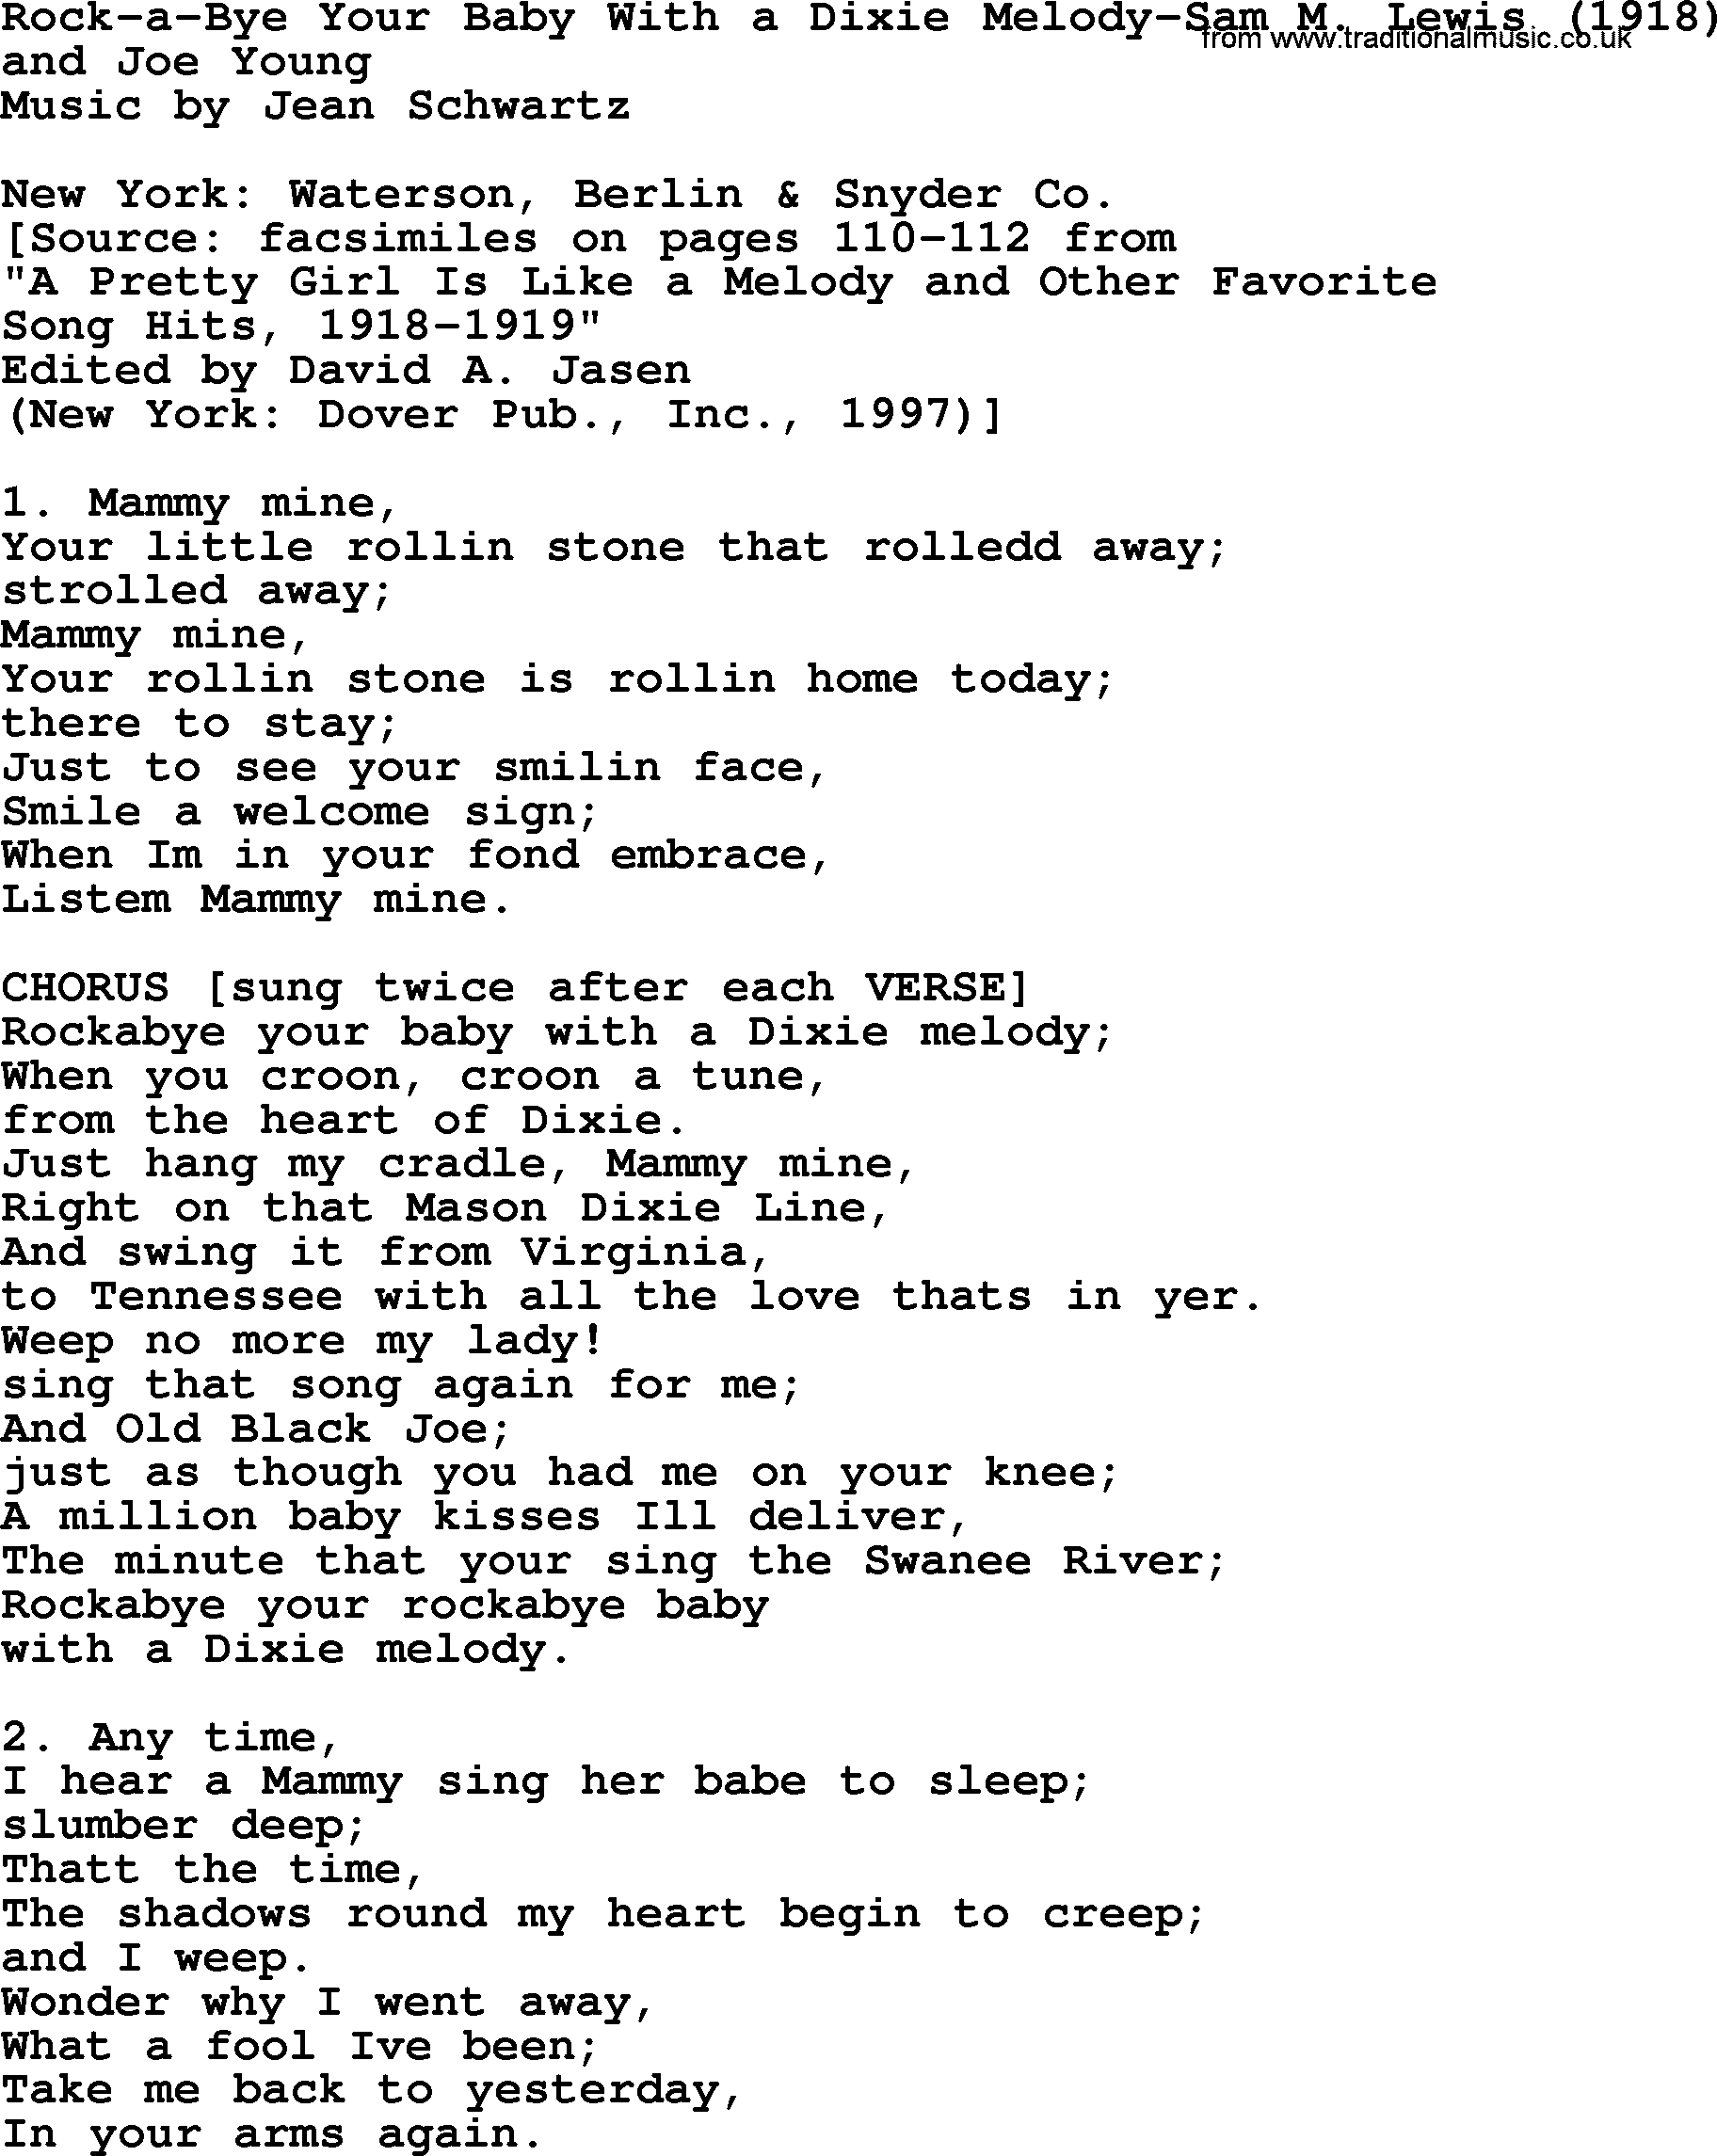 World War(WW1) One Song: Rock-A-Bye Your Baby With A Dixie Melody-Sam M Lewis 1918, lyrics and PDF